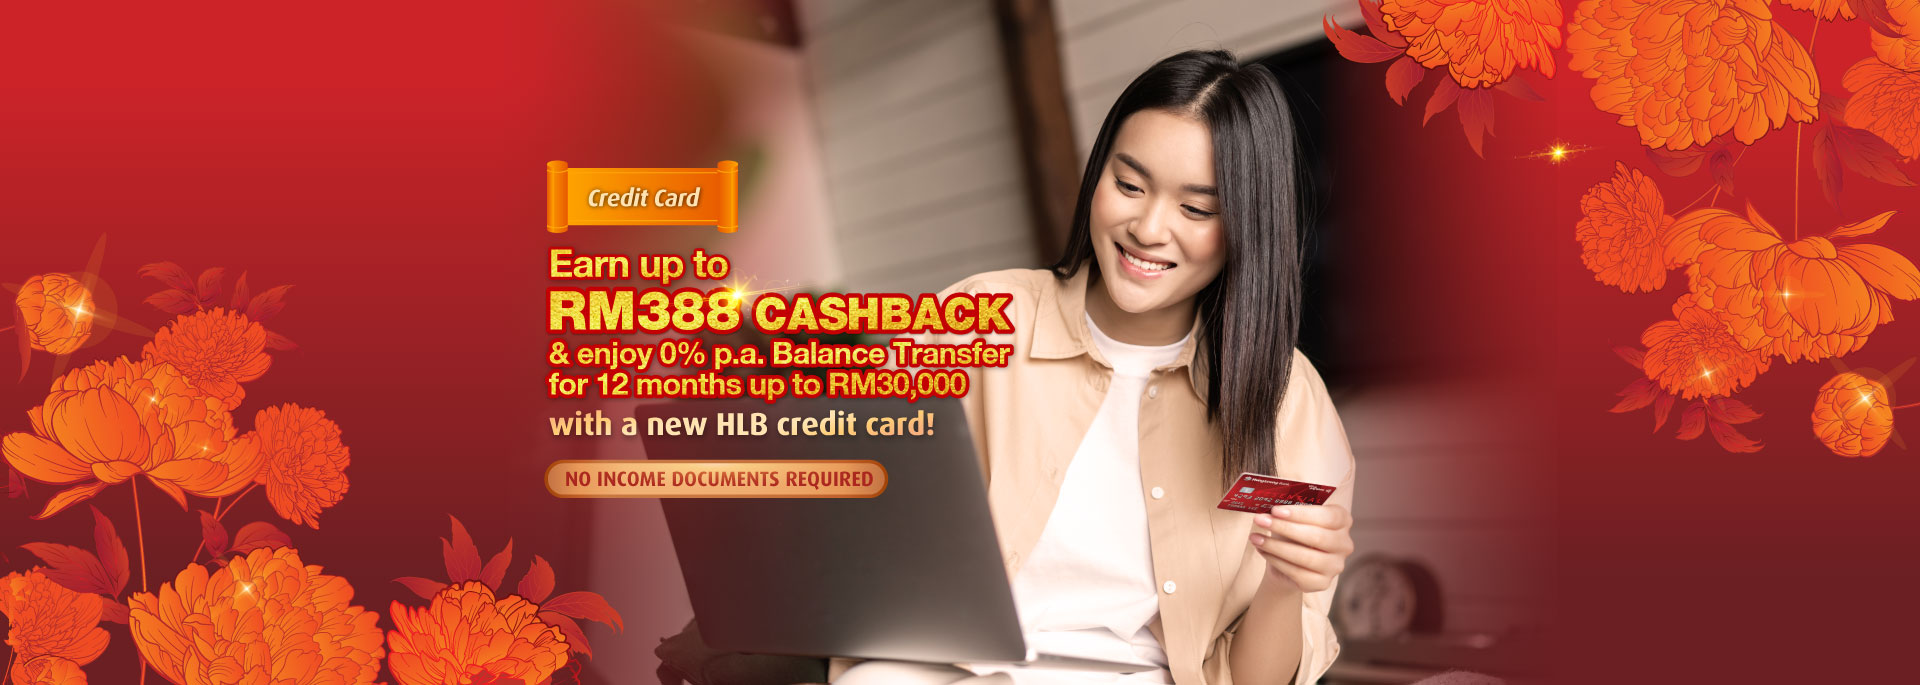 Stay Ong, Stay Strong and enjoy greater rewards when you apply for a new HLB Credit Card.